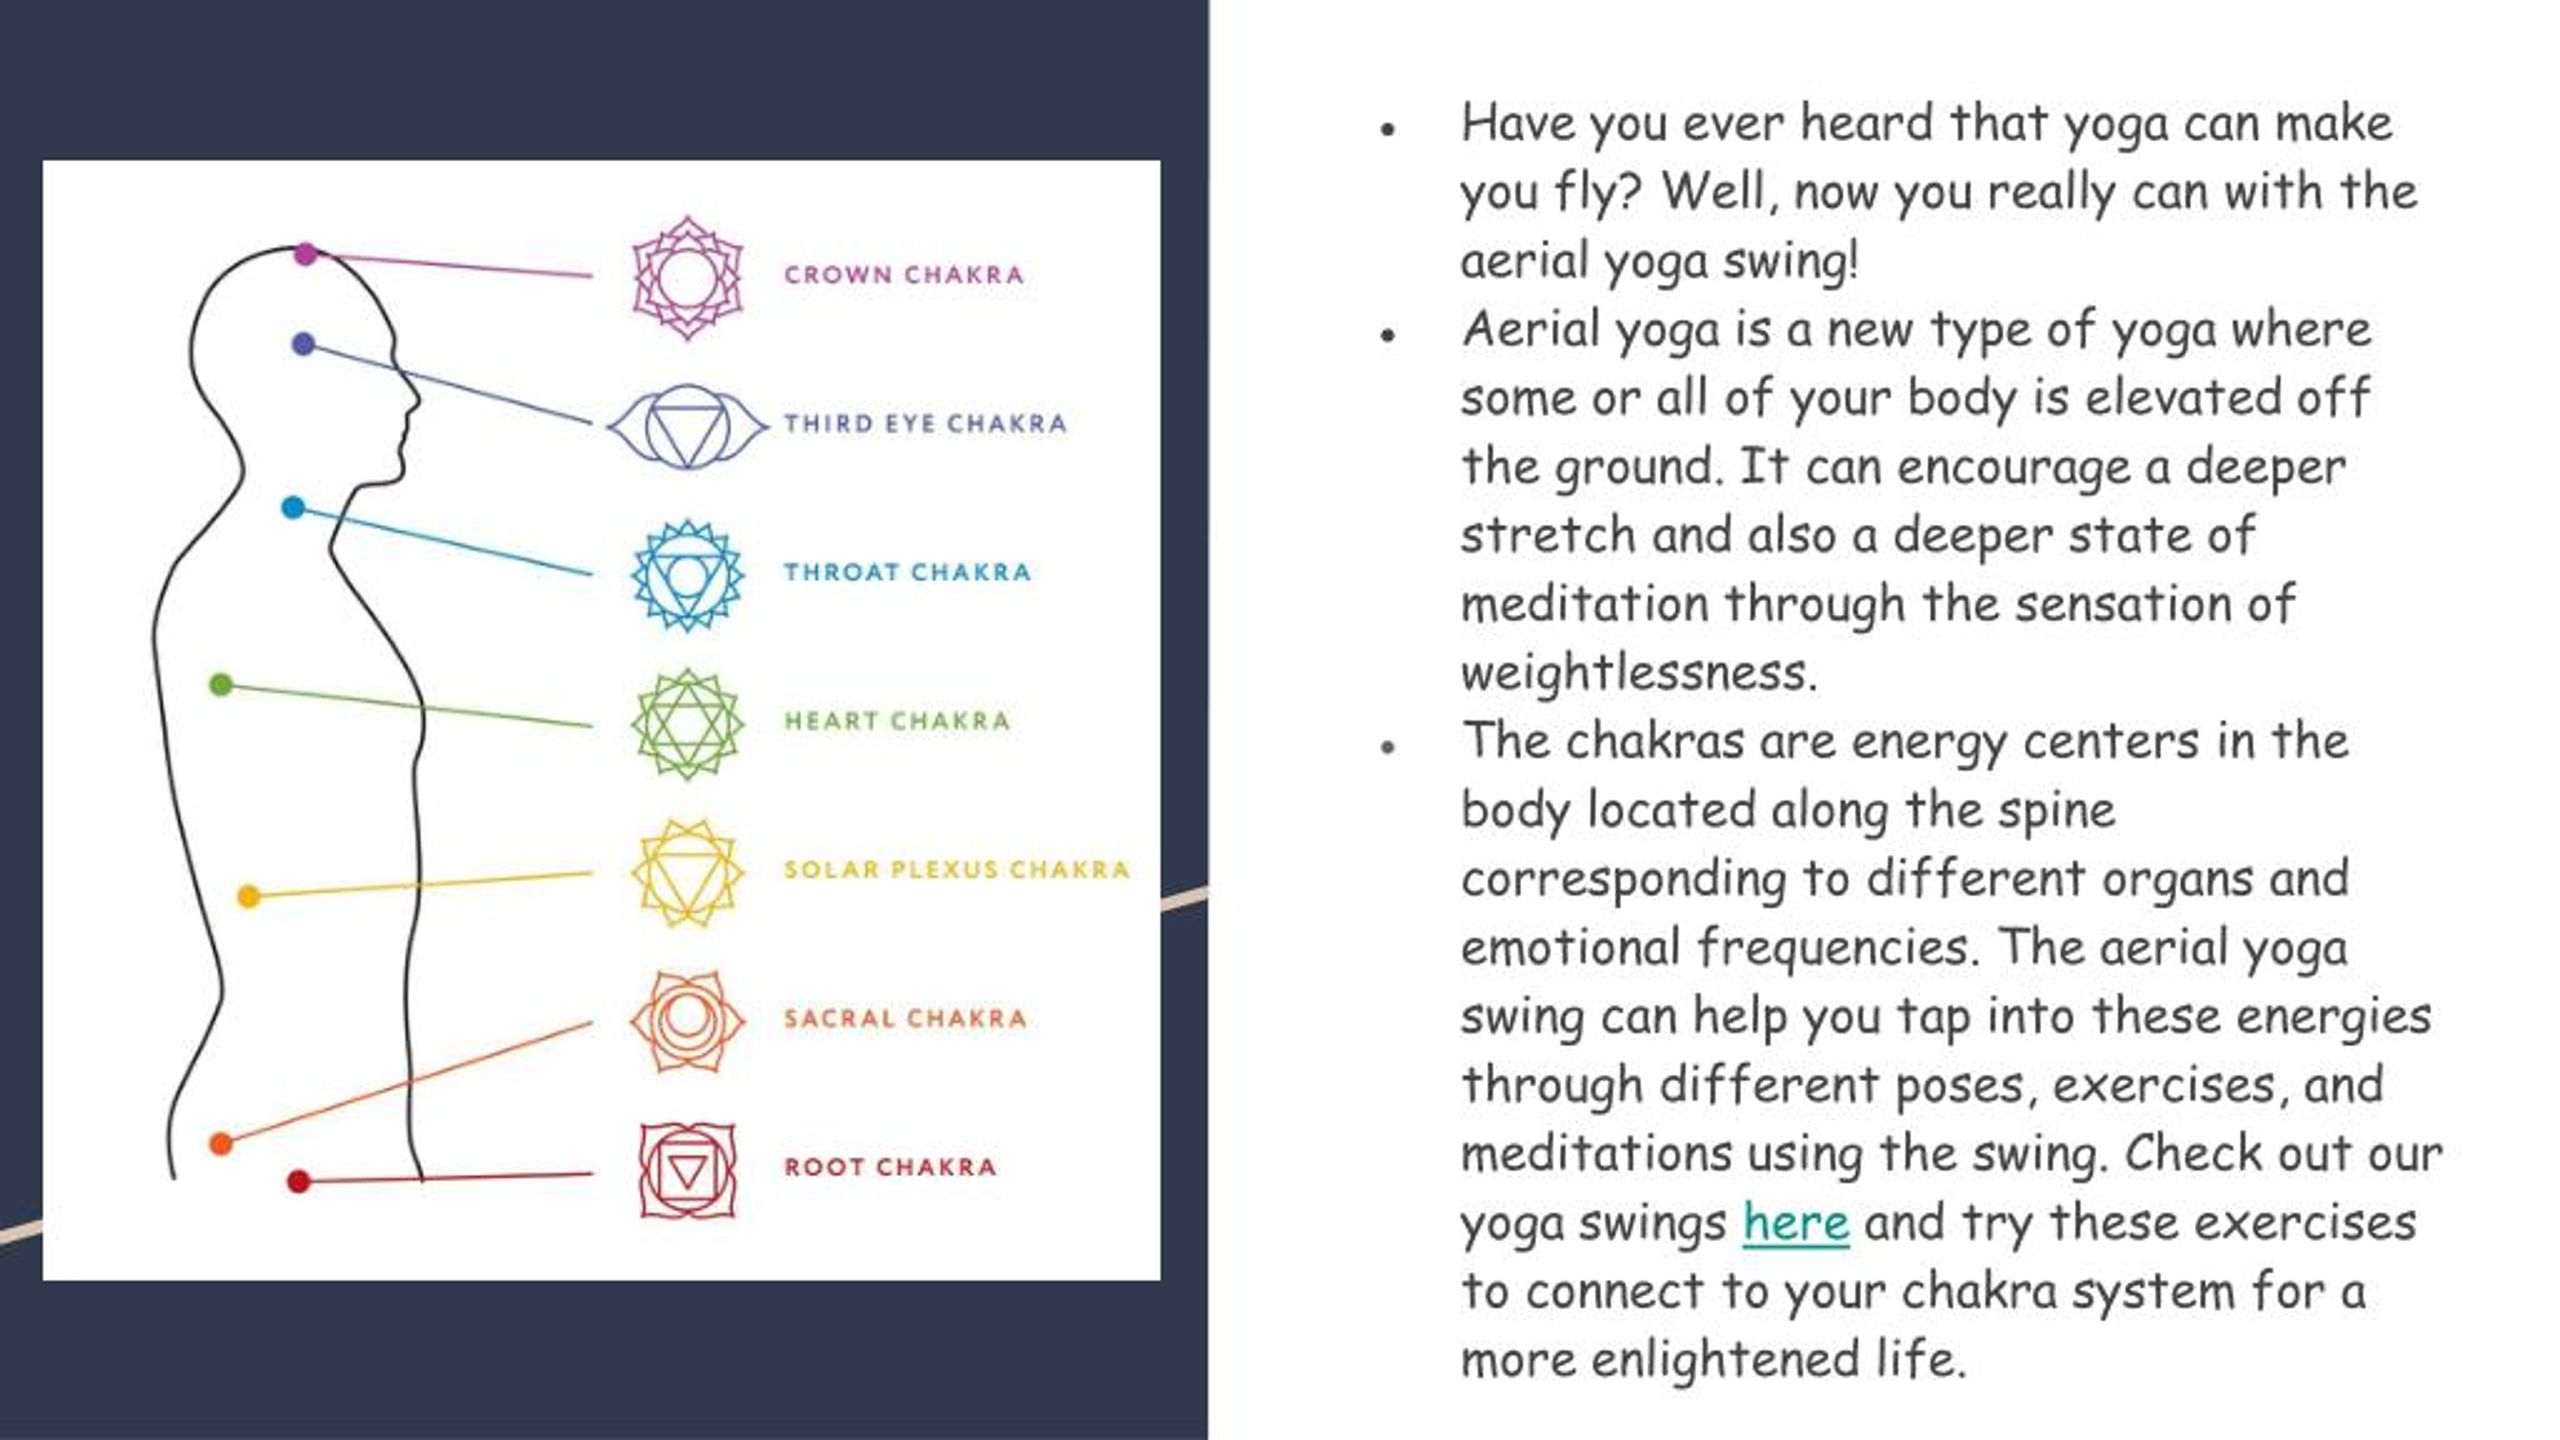 Aerial Yoga Swing Sequence for the Chakras - Yoga King Blog